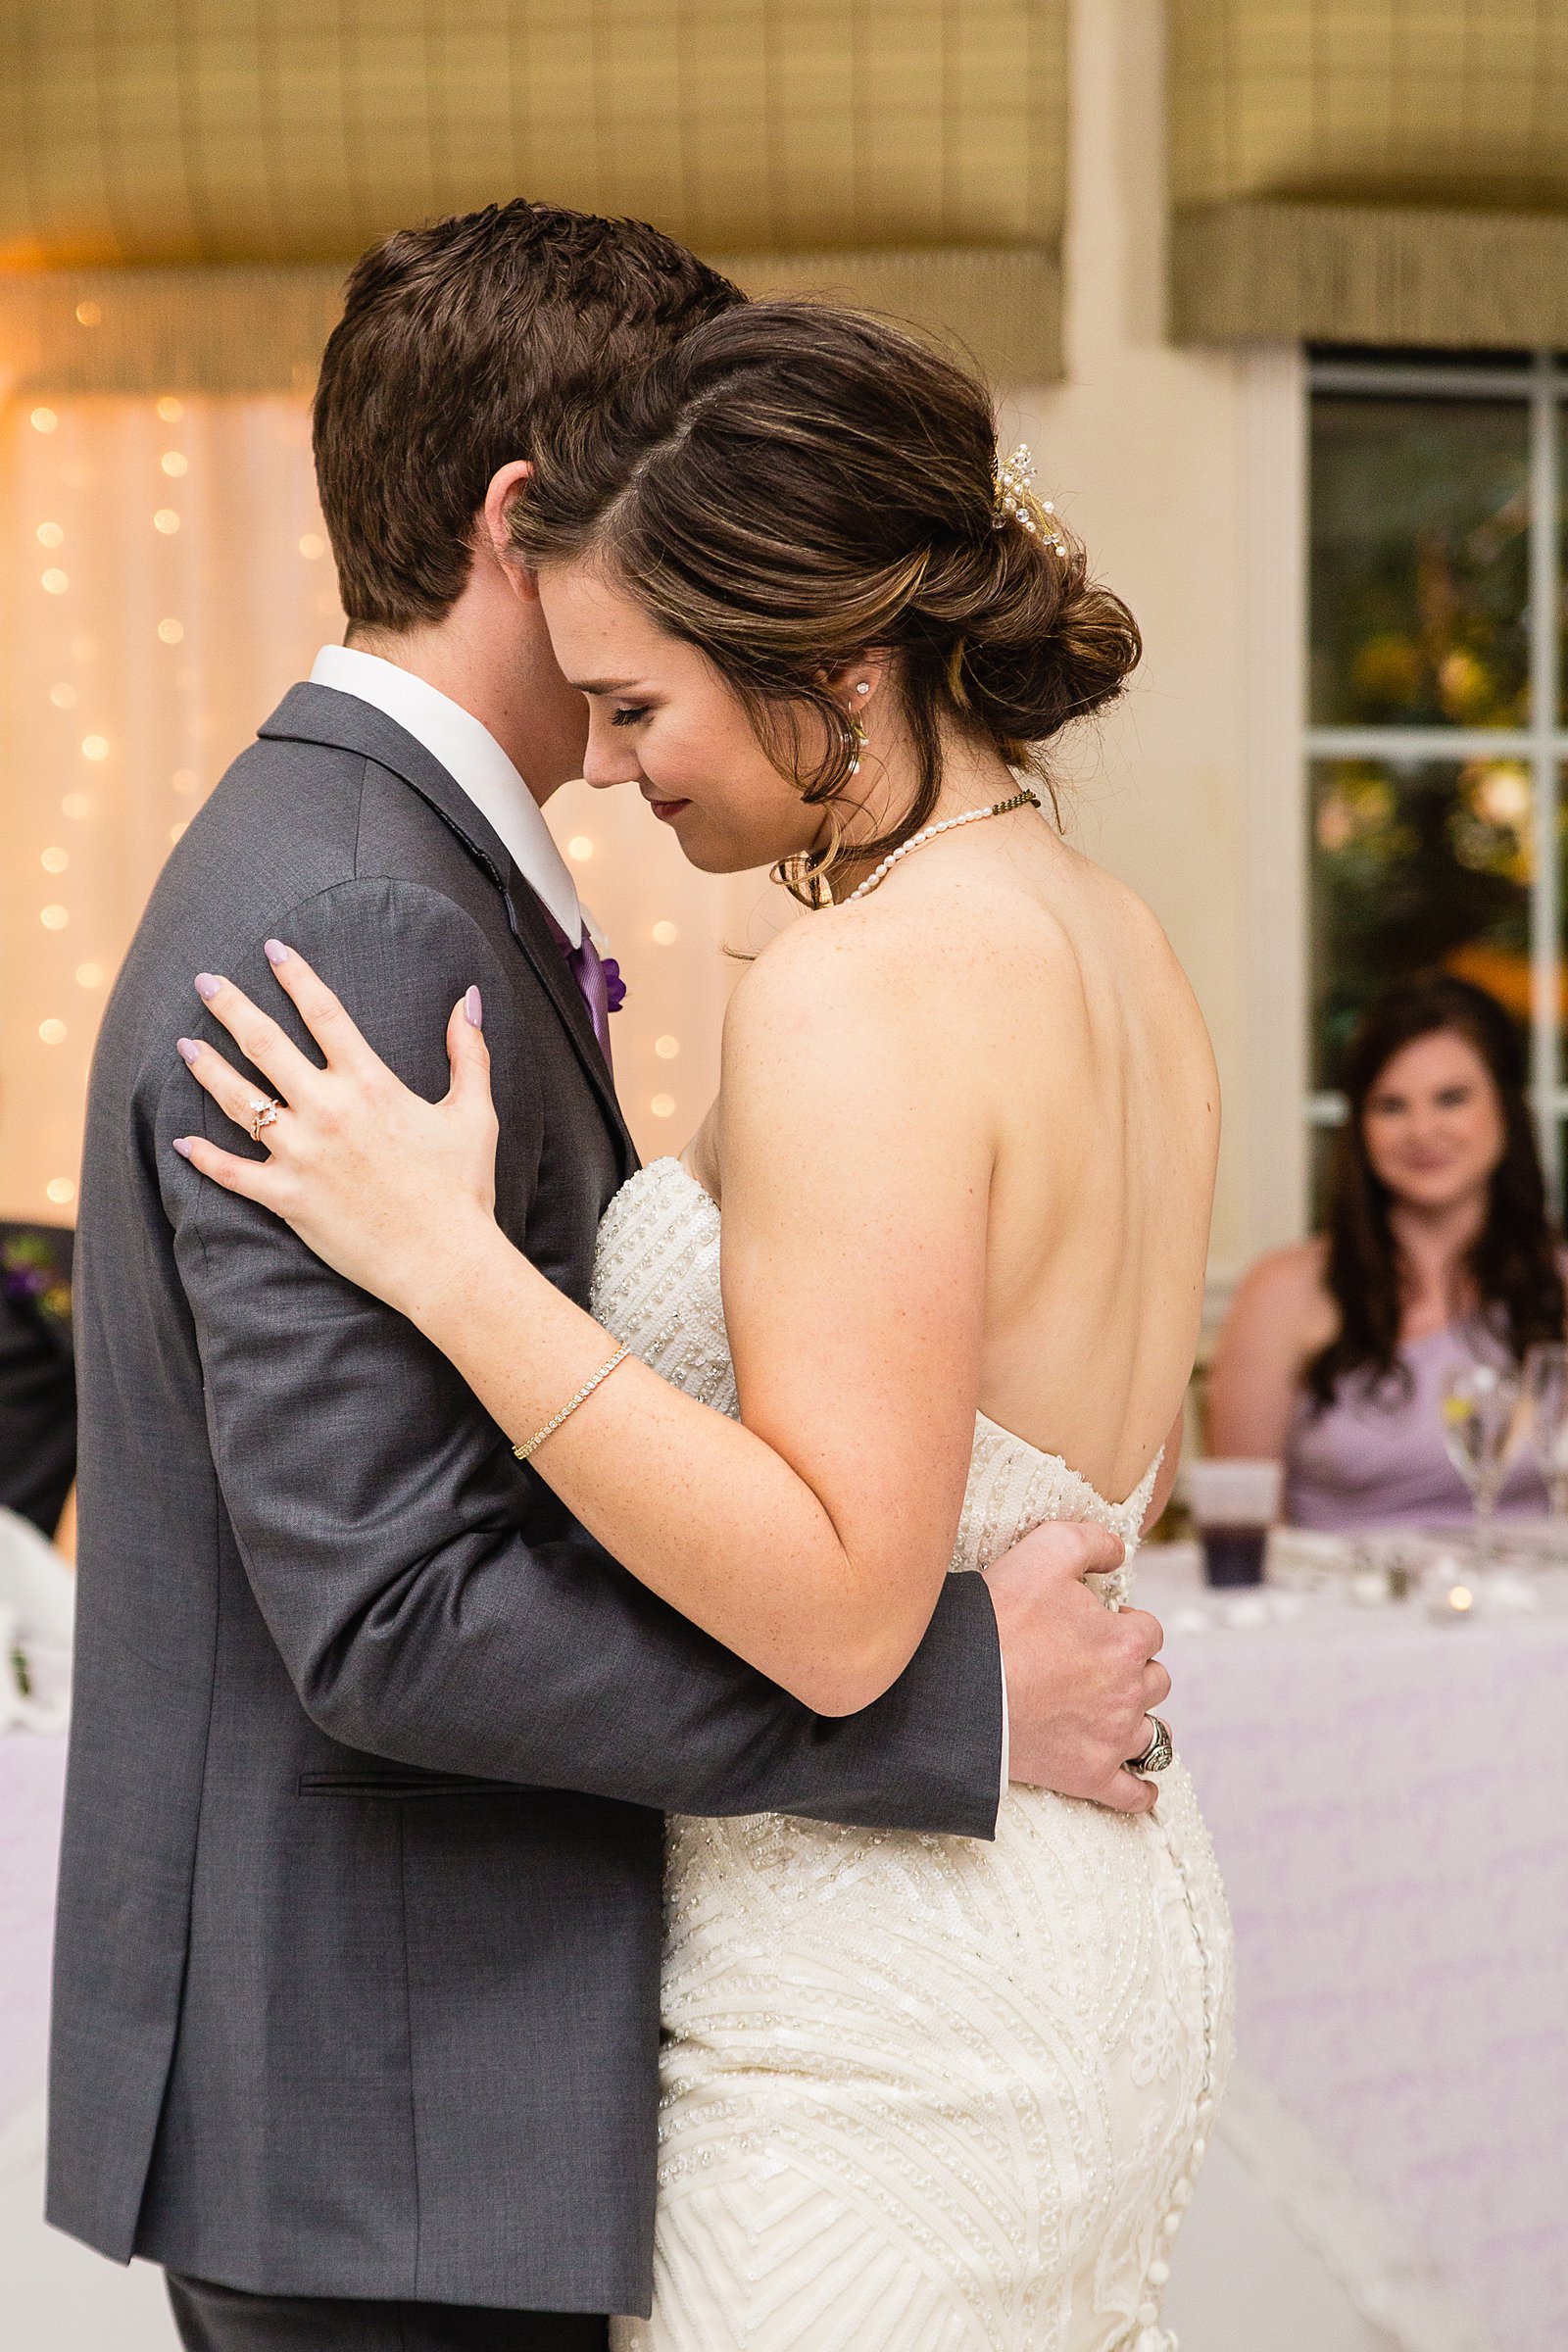 Bride and Groom sharing first dance at their The Wright House wedding reception by Arizona wedding photographer PMA Photography.